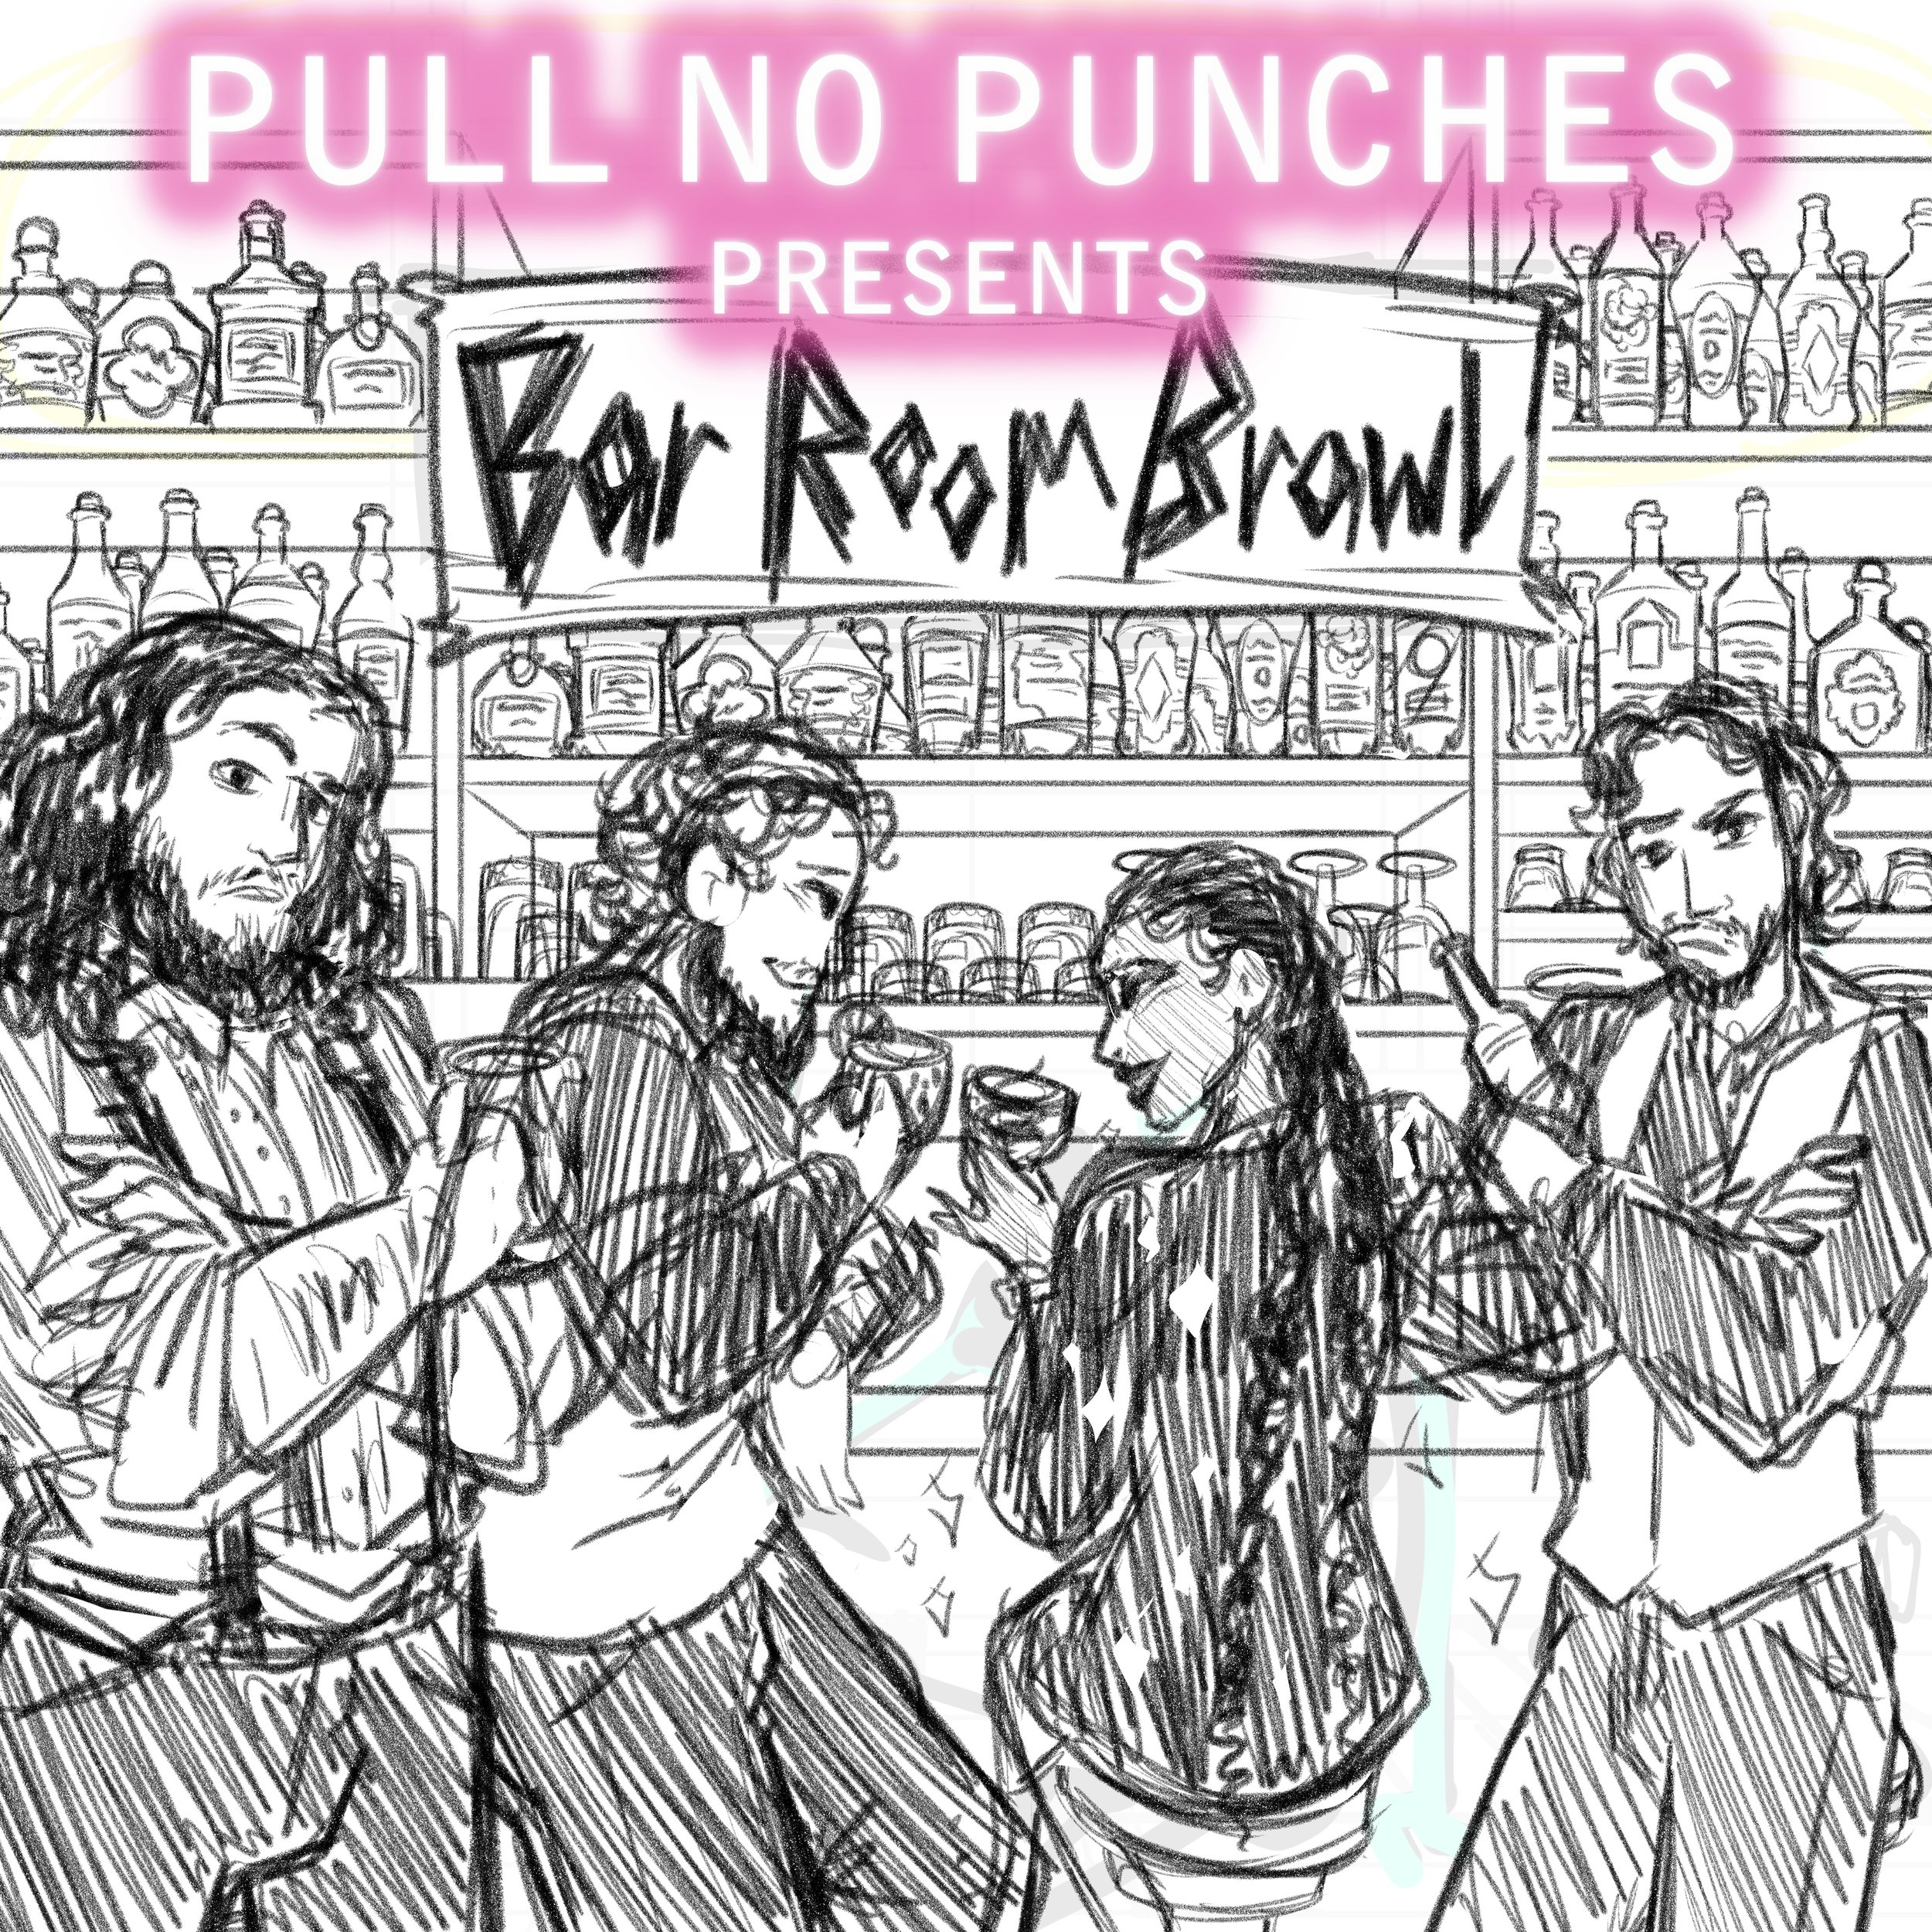 Commission_PullNoPunches_BarRoomBrawl_SKETCH.jpg